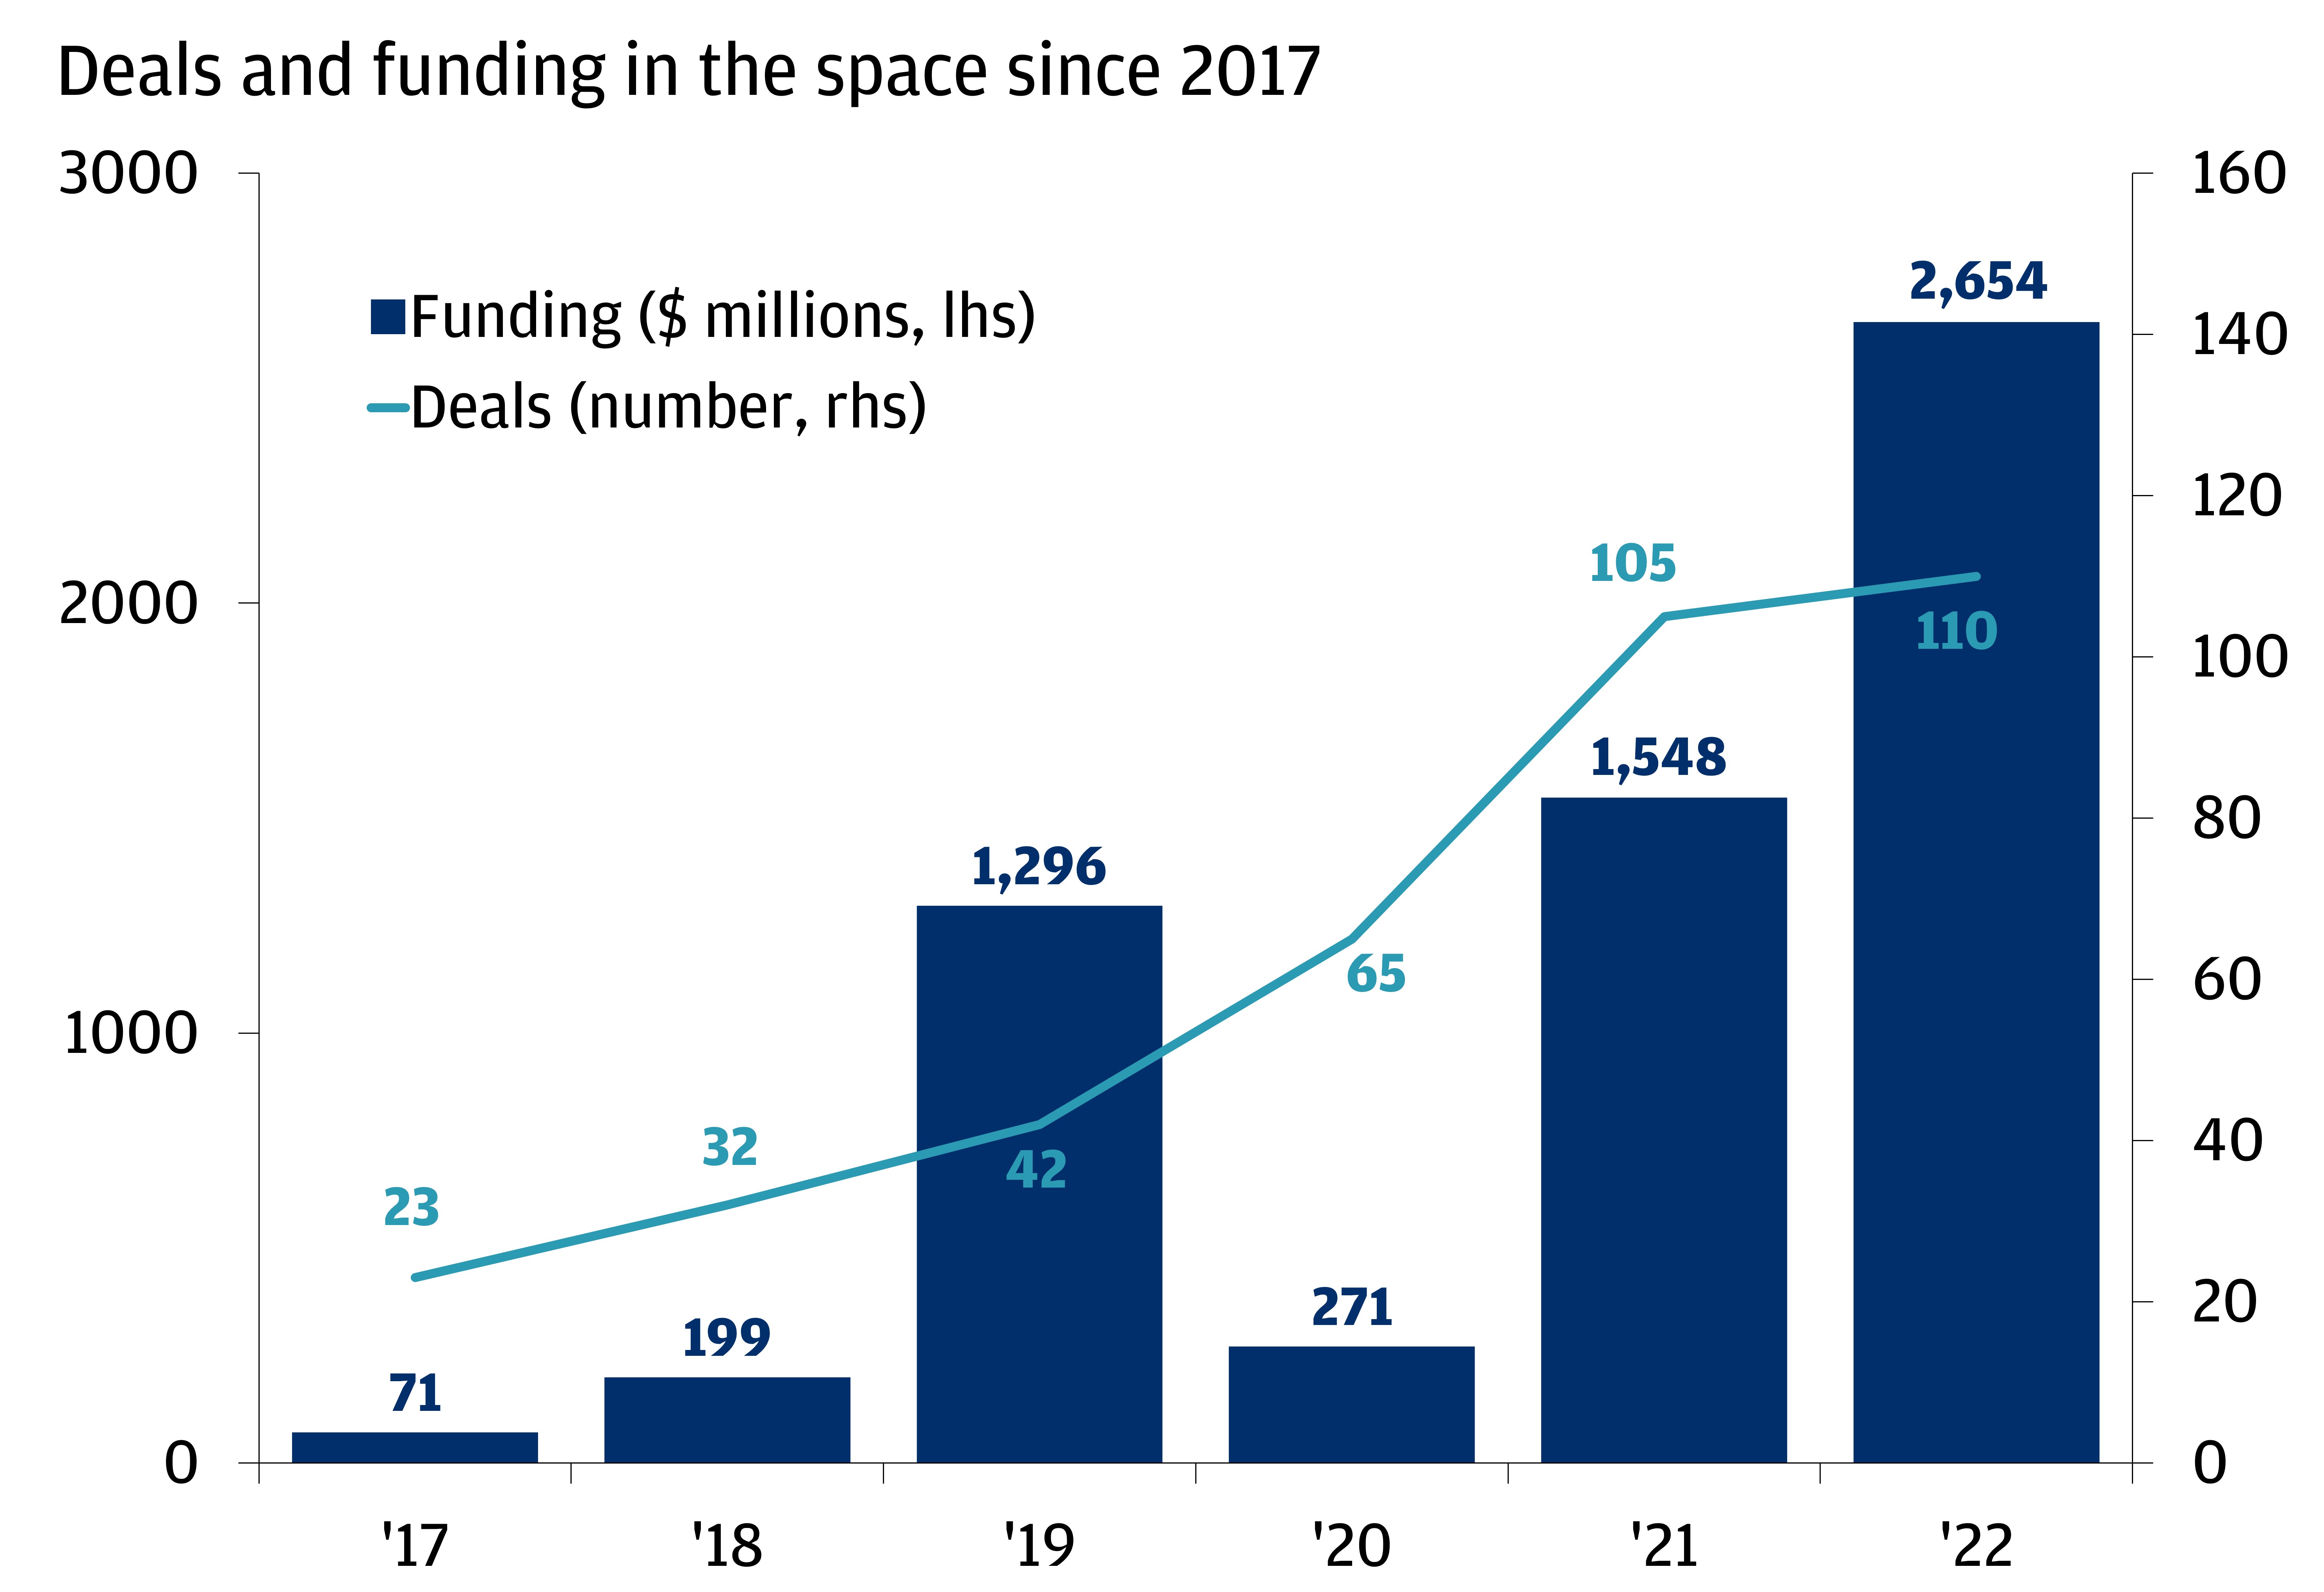 The chart describes the number of deals and the amount of funding in the space of generative AI from 2017 to 2022. 